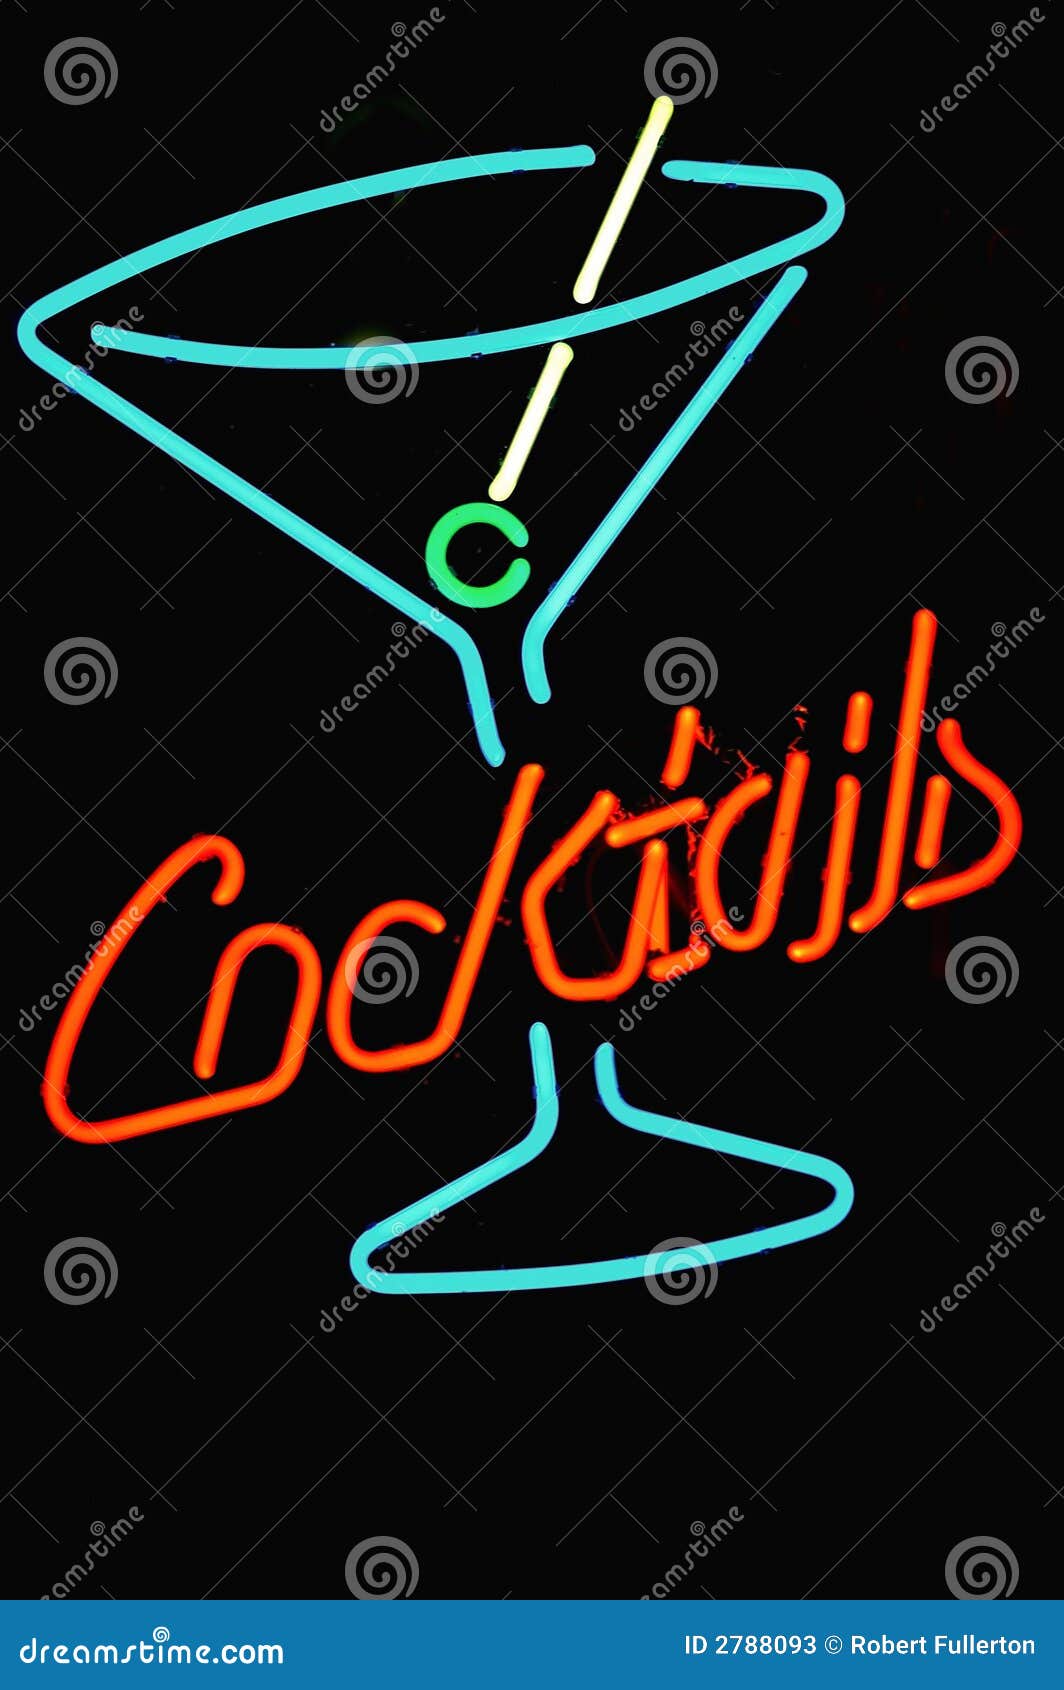 Neon cocktail sign stock image. Image of cocktails